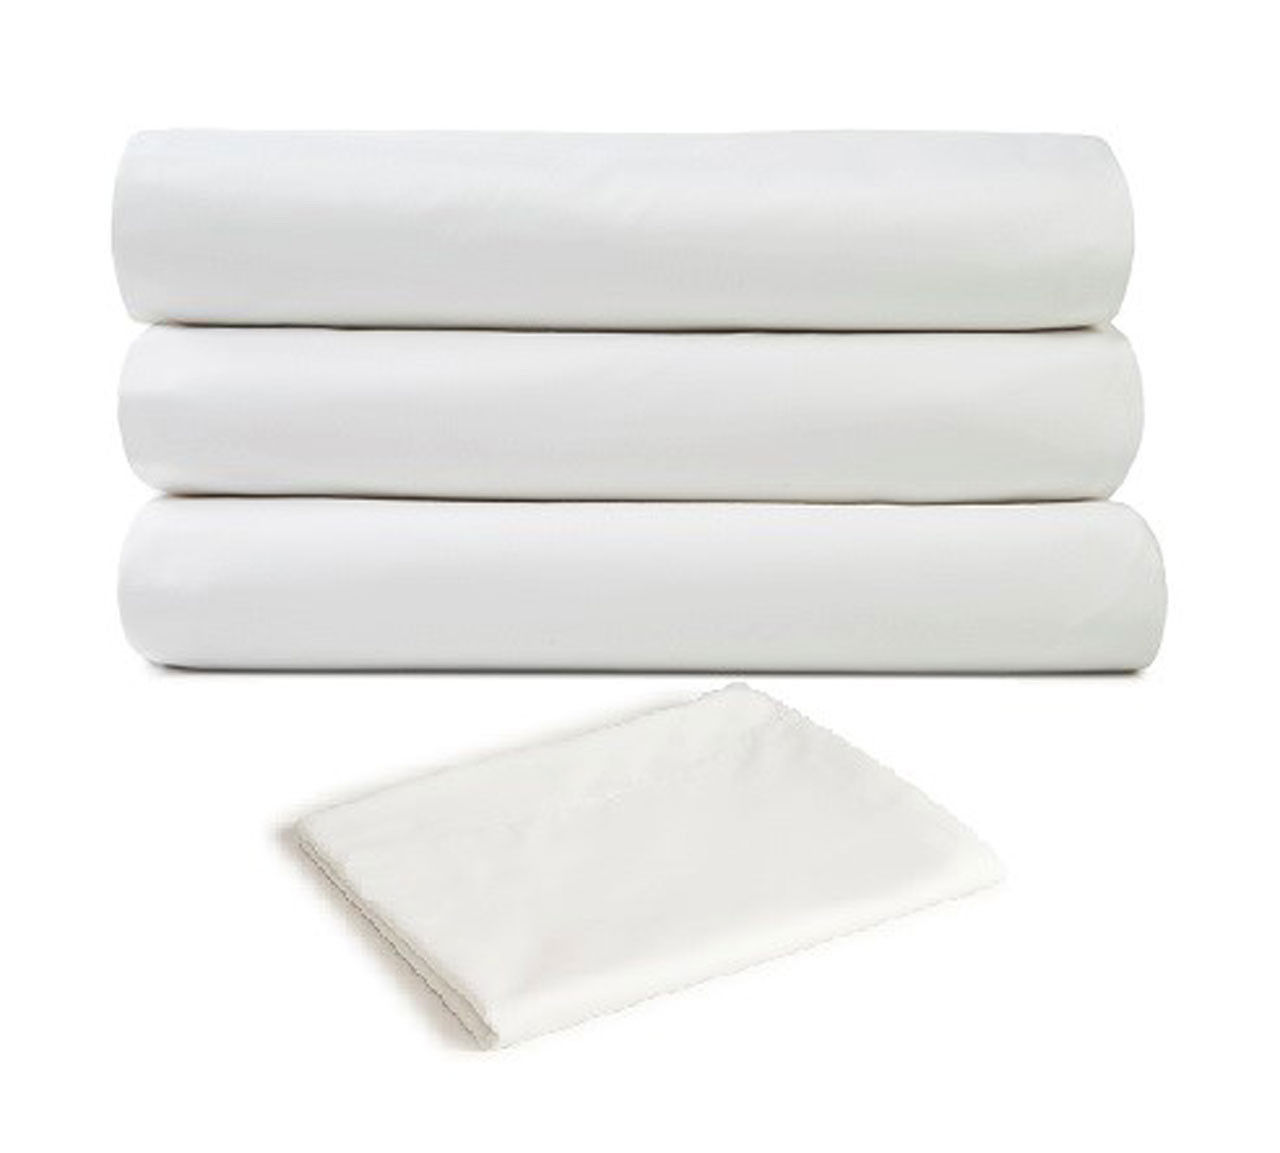 Does a bulk case of 100 polyester bed sheets include pillowcases?